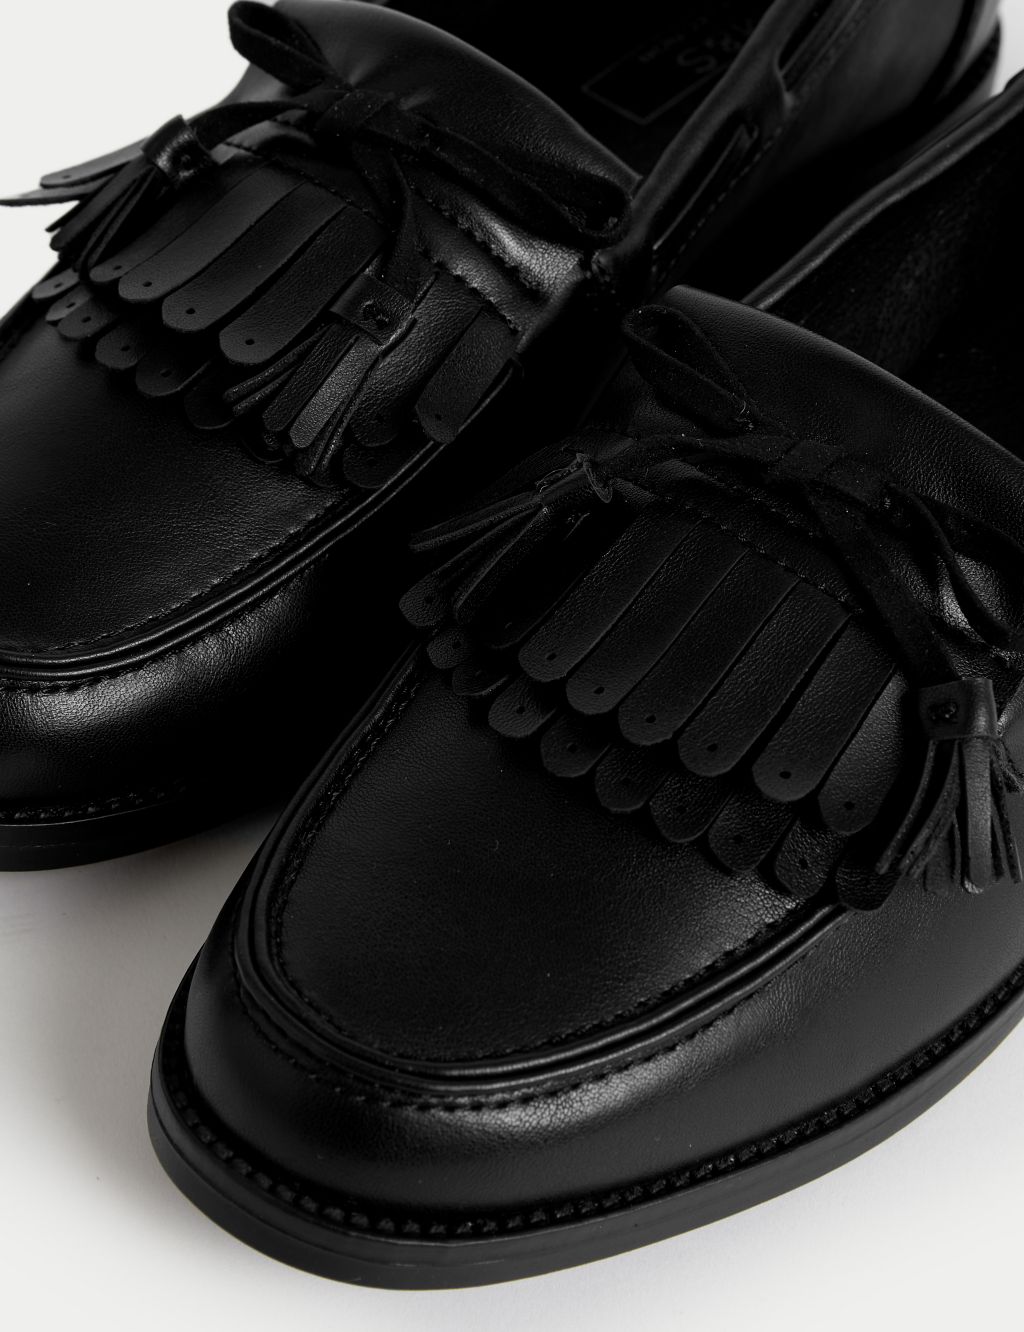 Tassel Bow Flat Loafers image 3